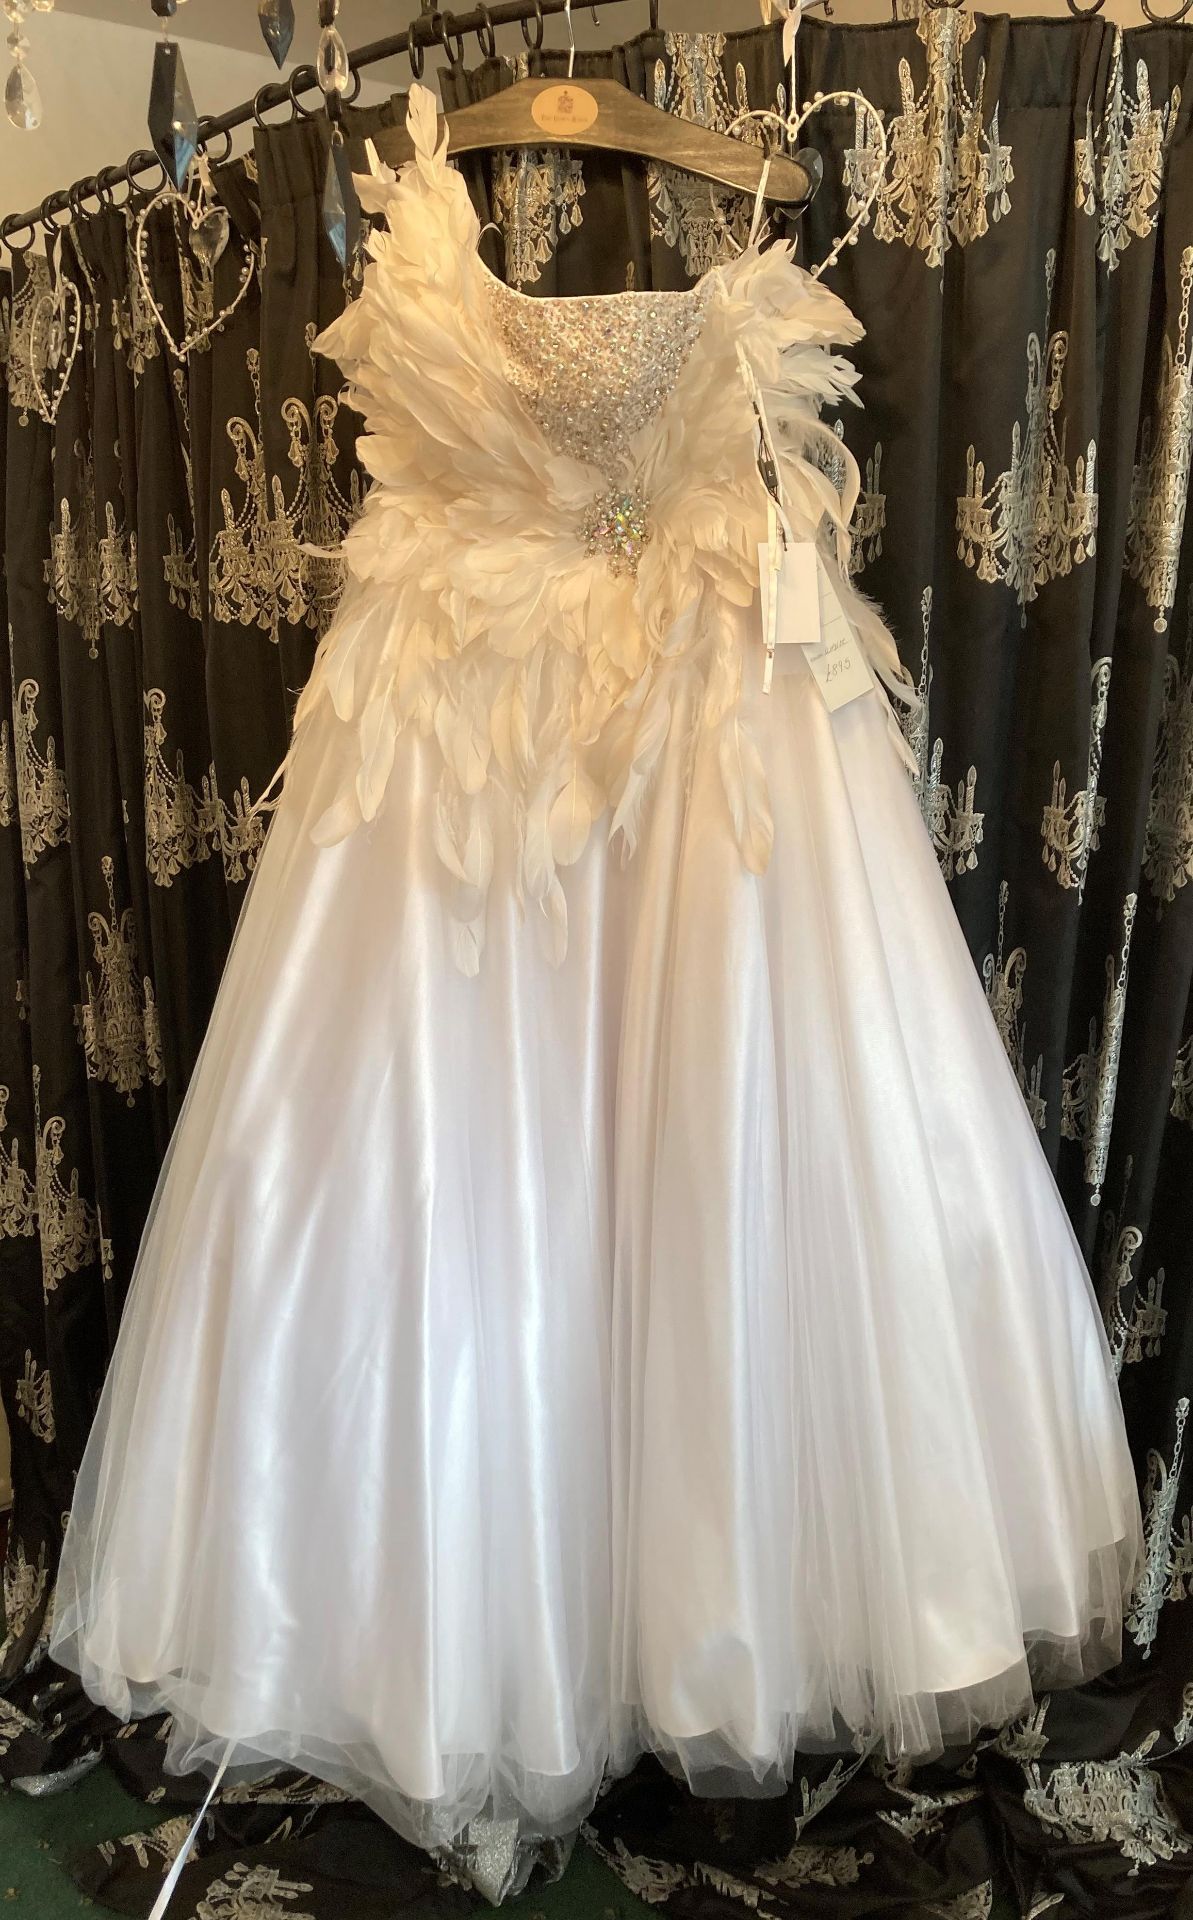 Macduggal feather ball gown, white, size UK 16.